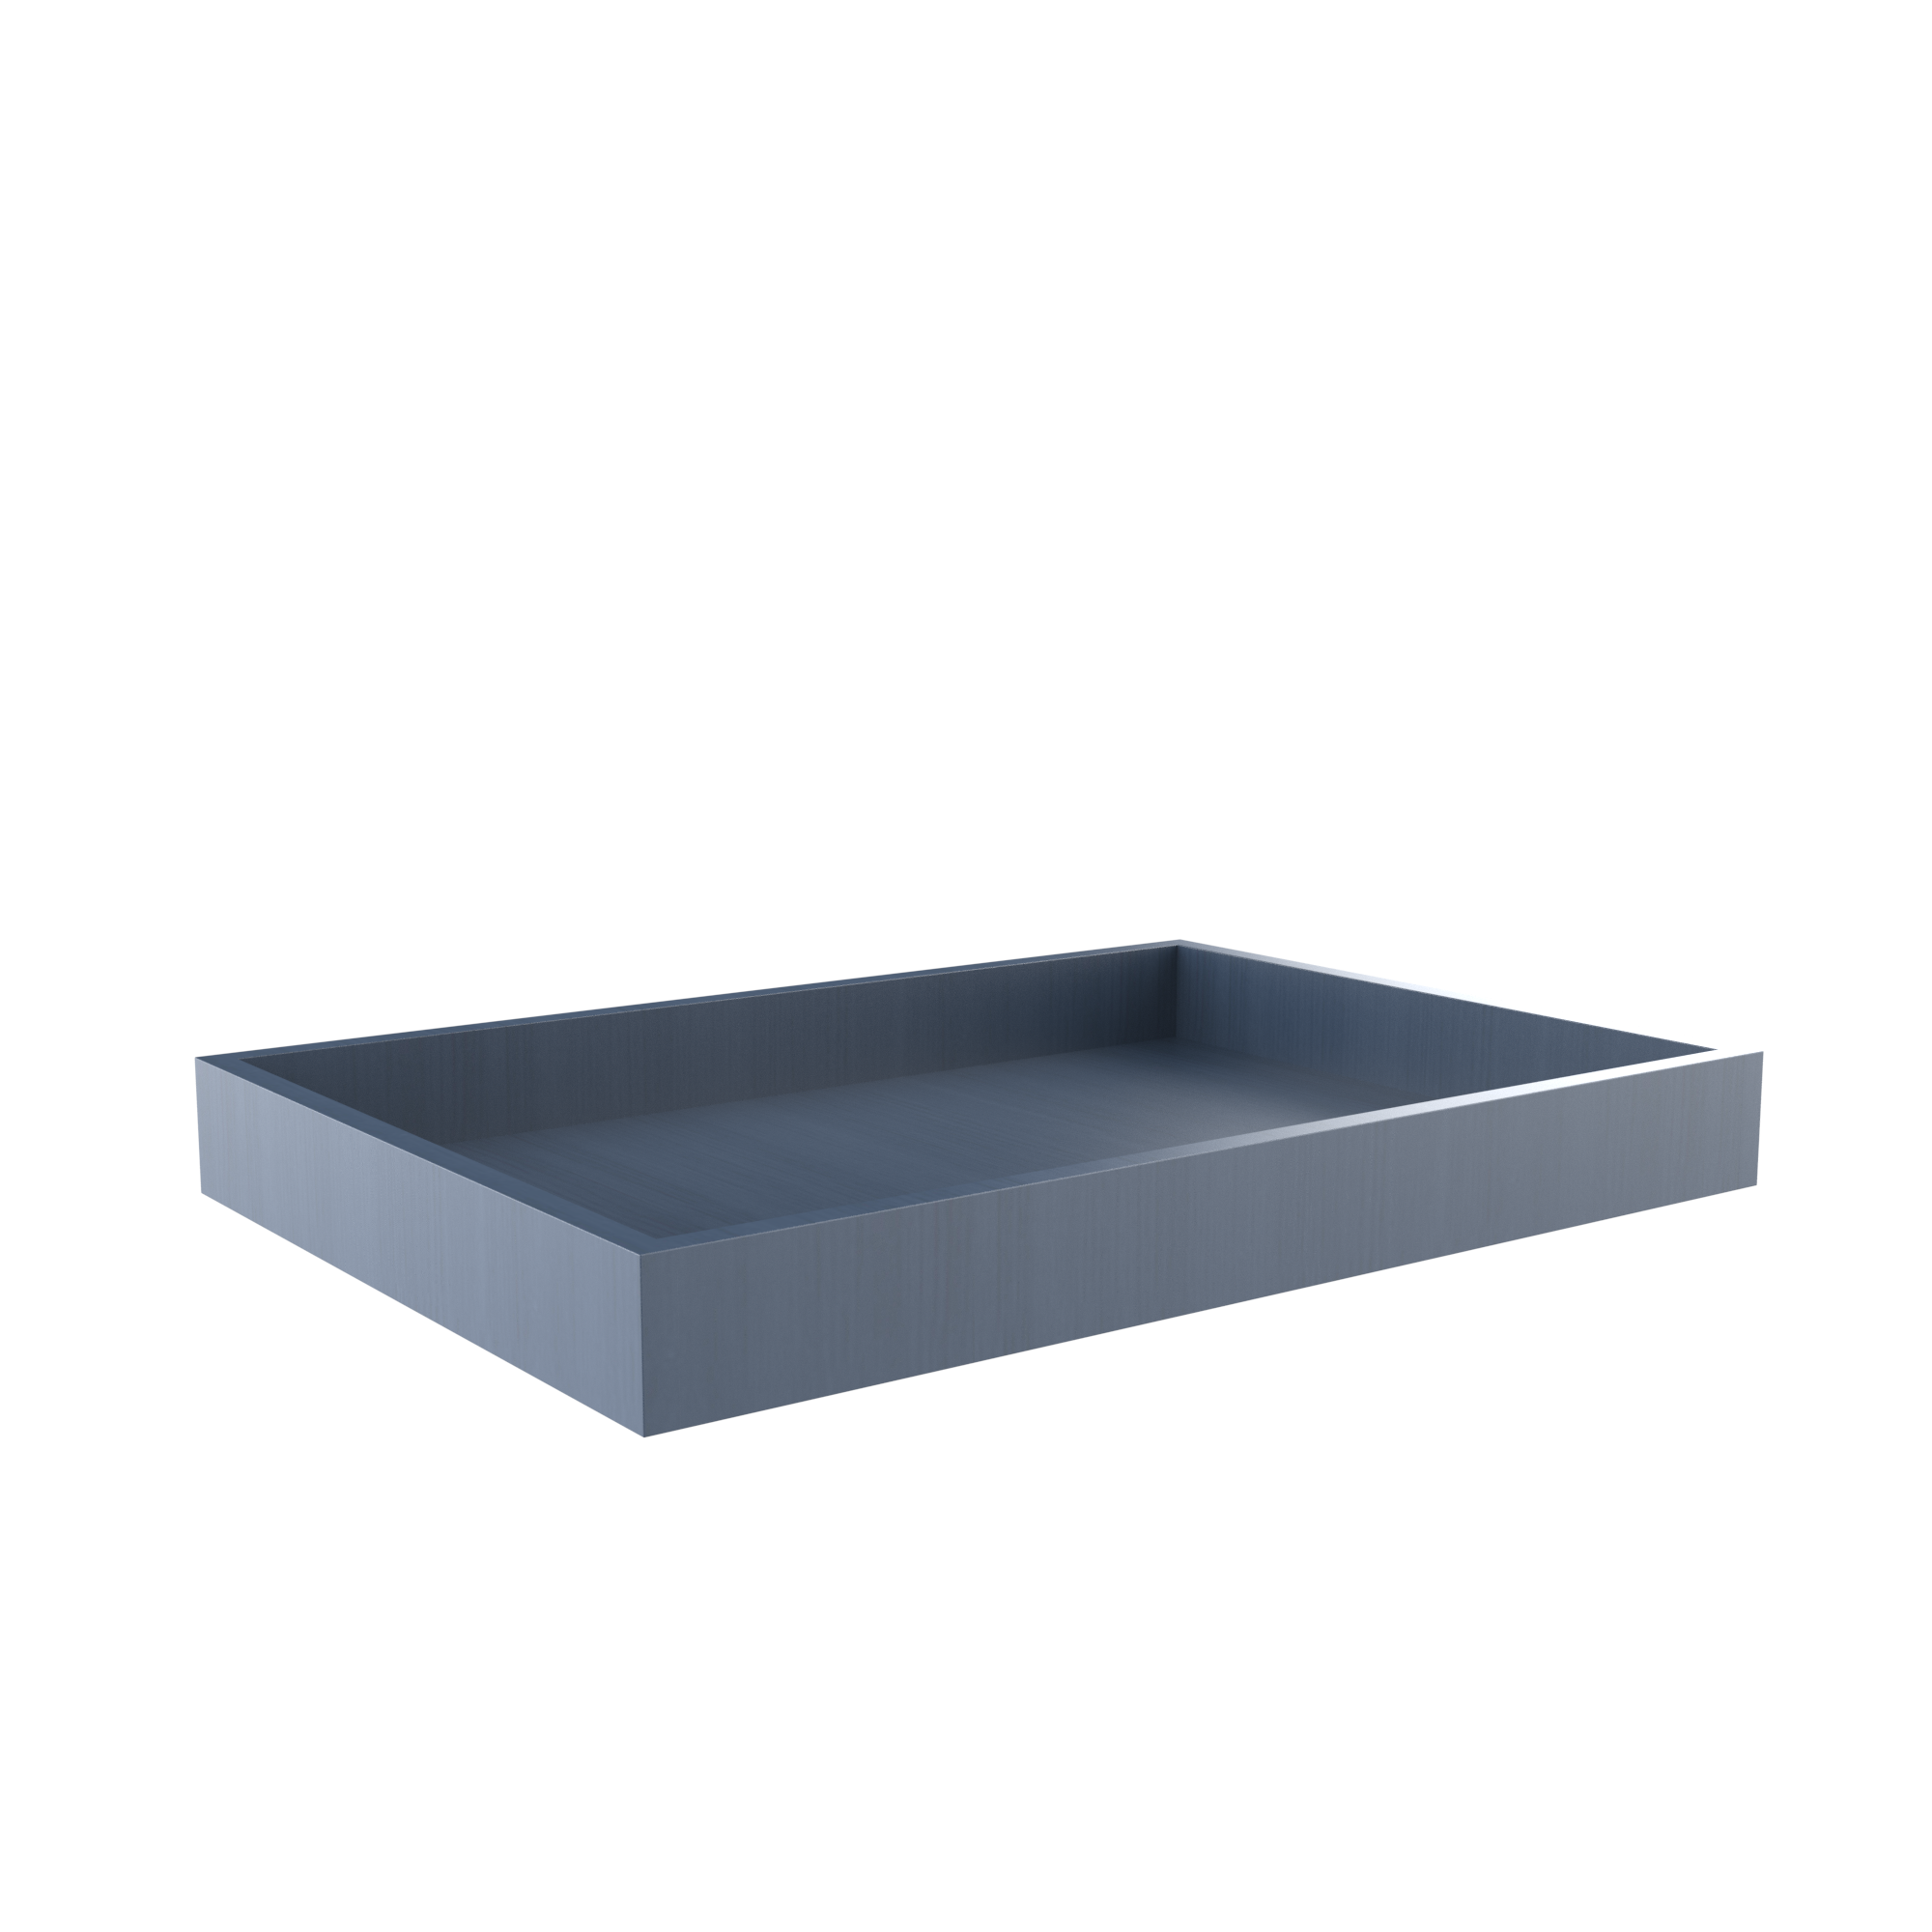 Roll Out Tray for Cabinets - Fits B30 - Blue Shaker Cabinet Cabinet - RTA